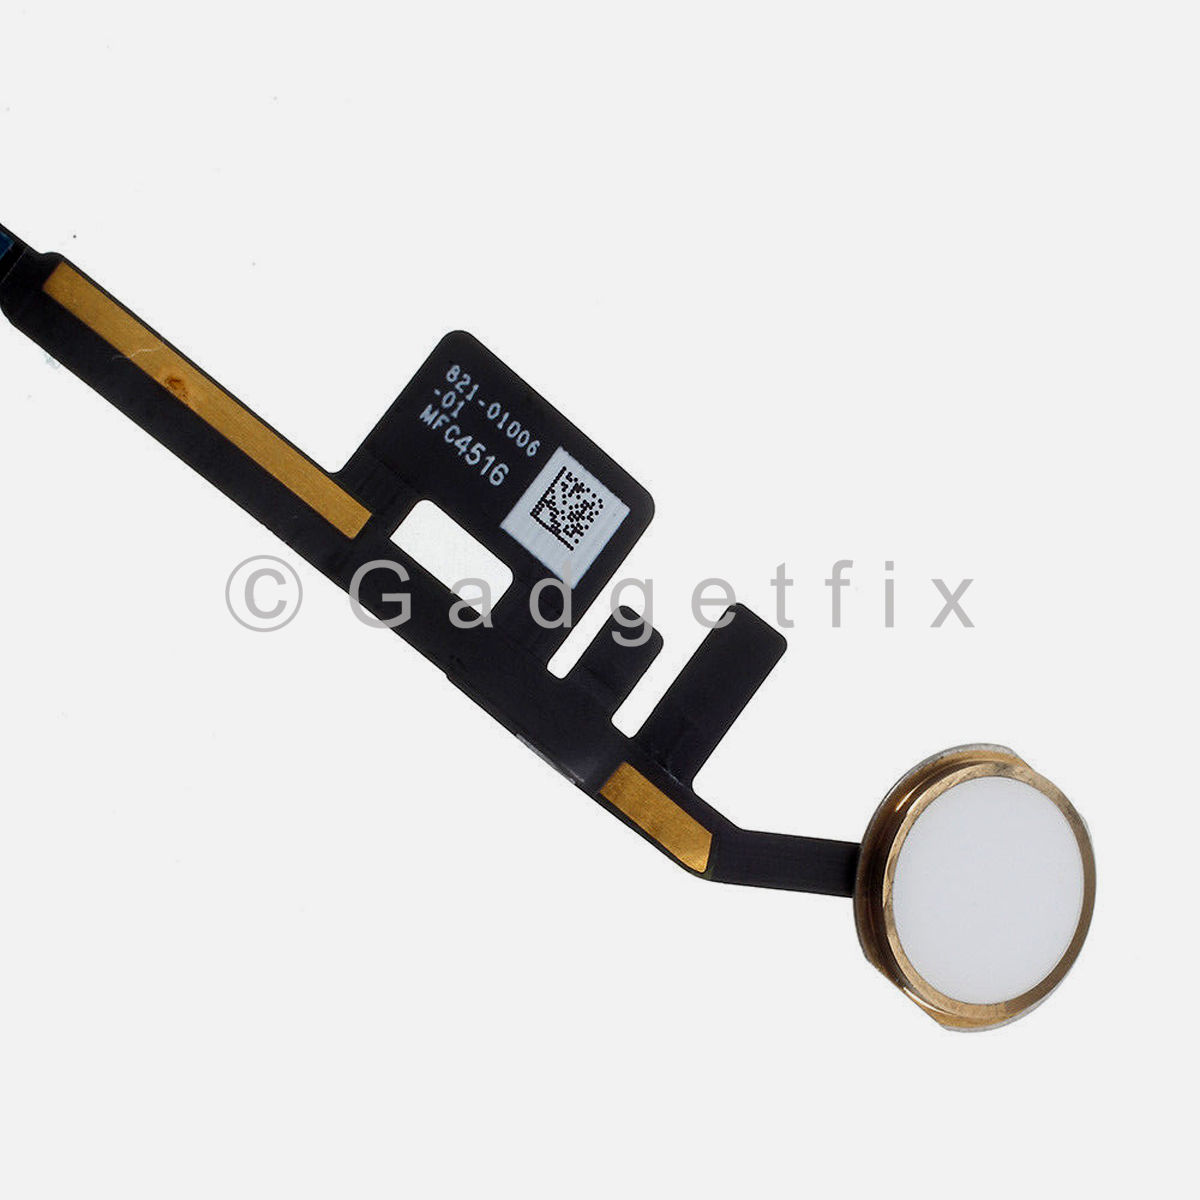 White | Gold Home Button Key Flex Cable Connector For iPad 5th Gen 9.7" 2017 A1822 A1823